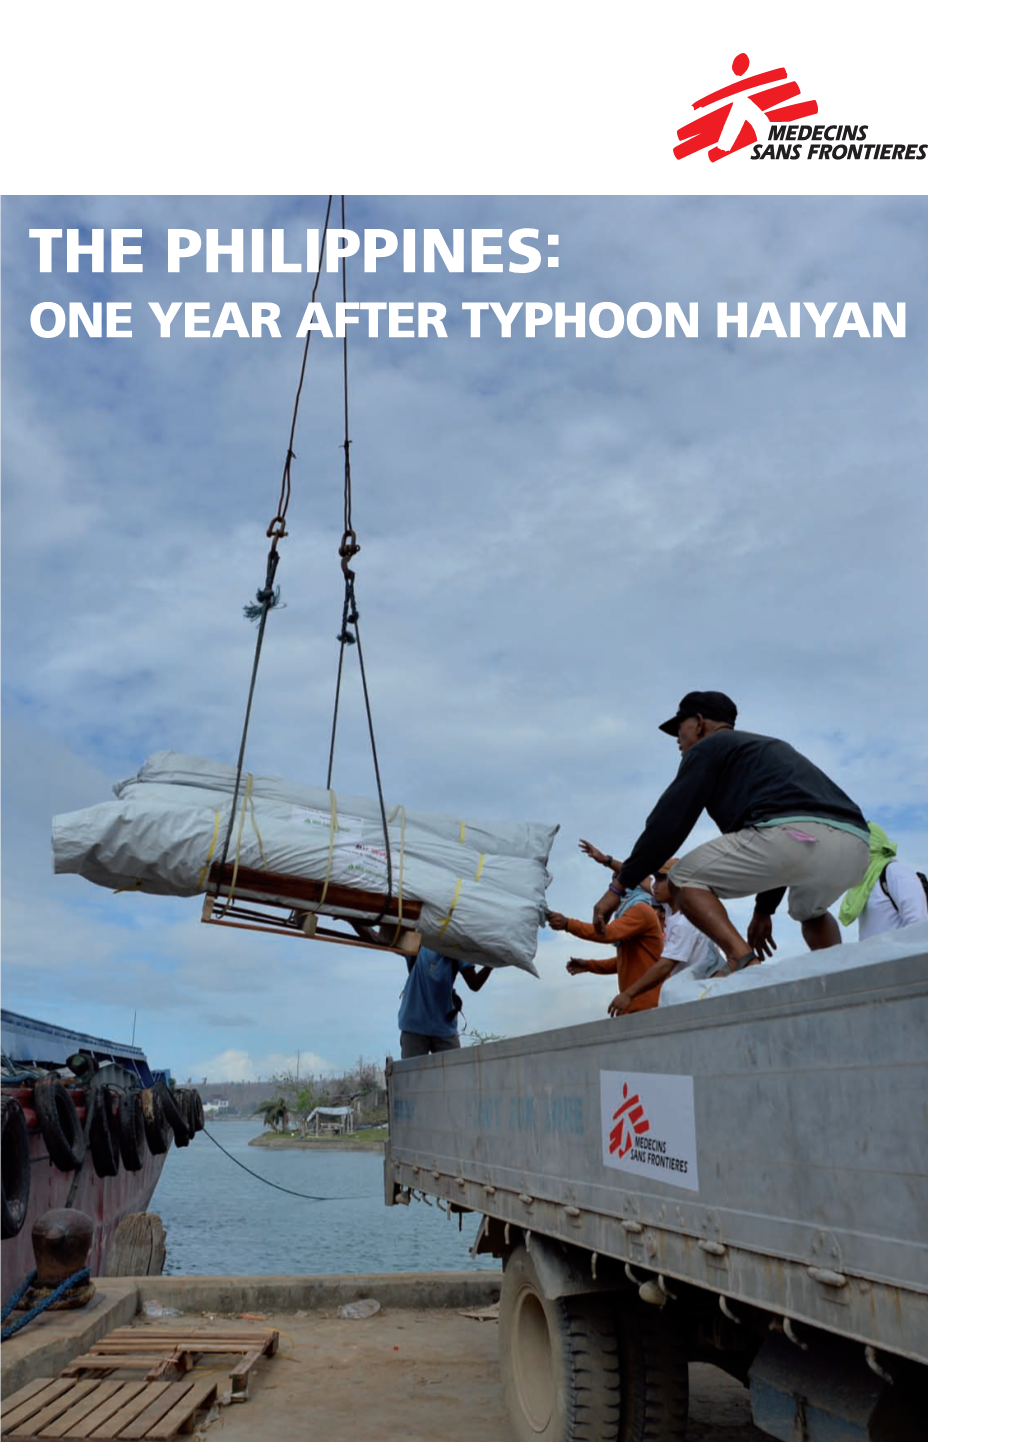 THE PHILIPPINES: ONE YEAR AFTER TYPHOON HAIYAN a Report on Médecins Sans Frontières’ Humanitarian Response